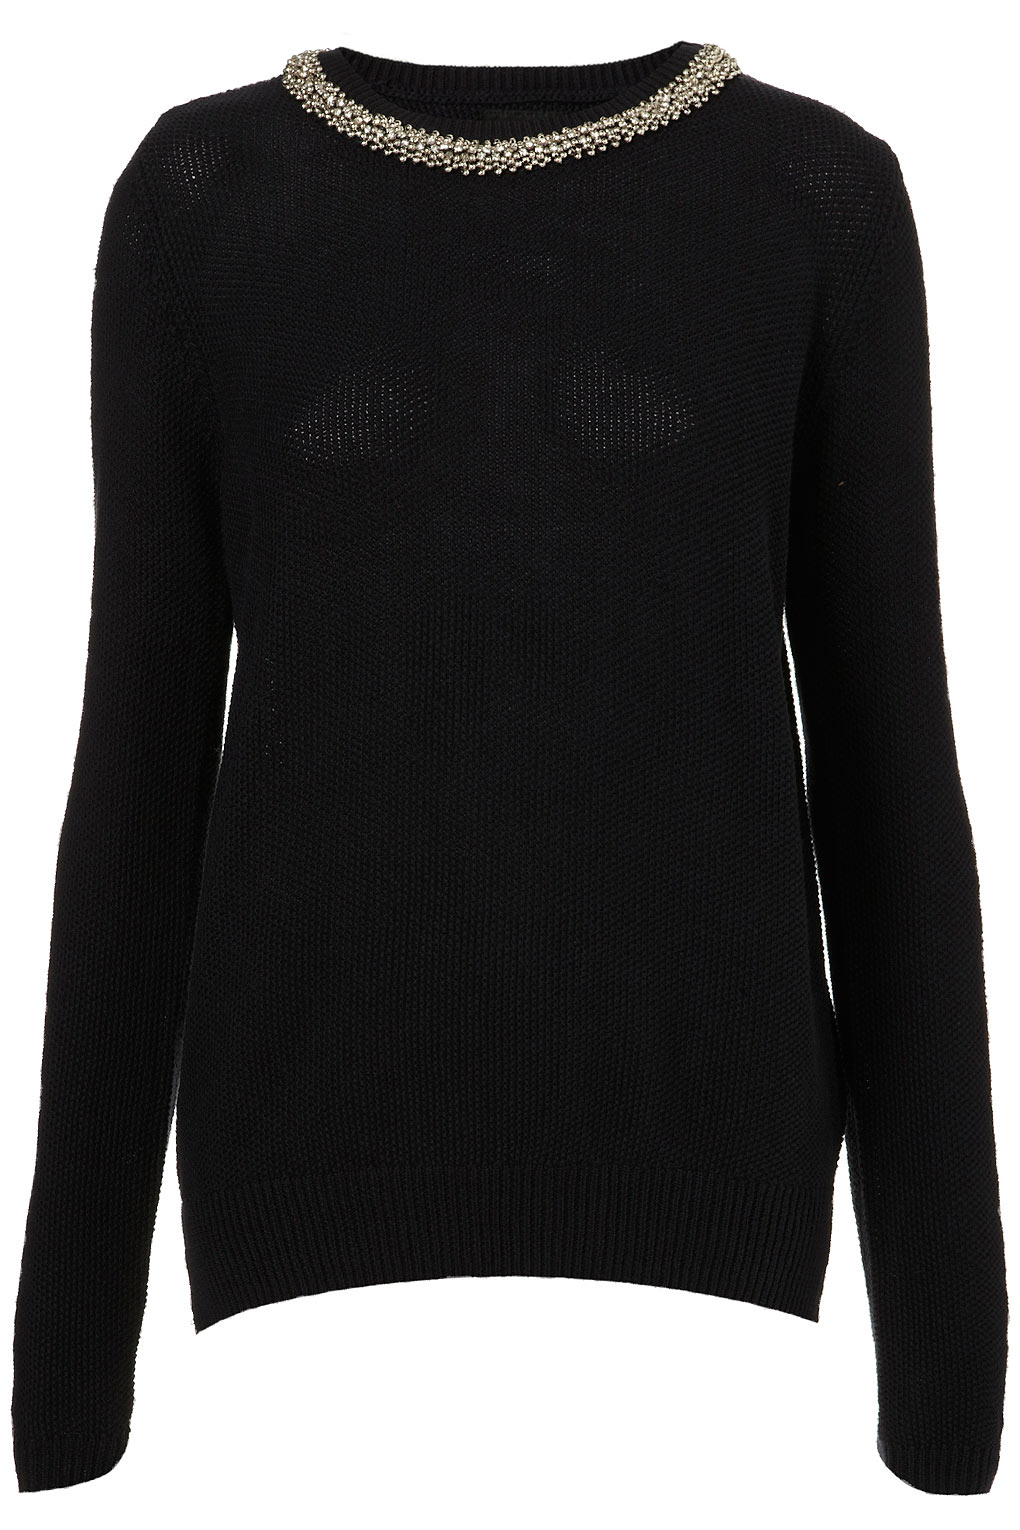 Fashion By Florence: Item of the Week - Knitted Bead Necklace Jumper